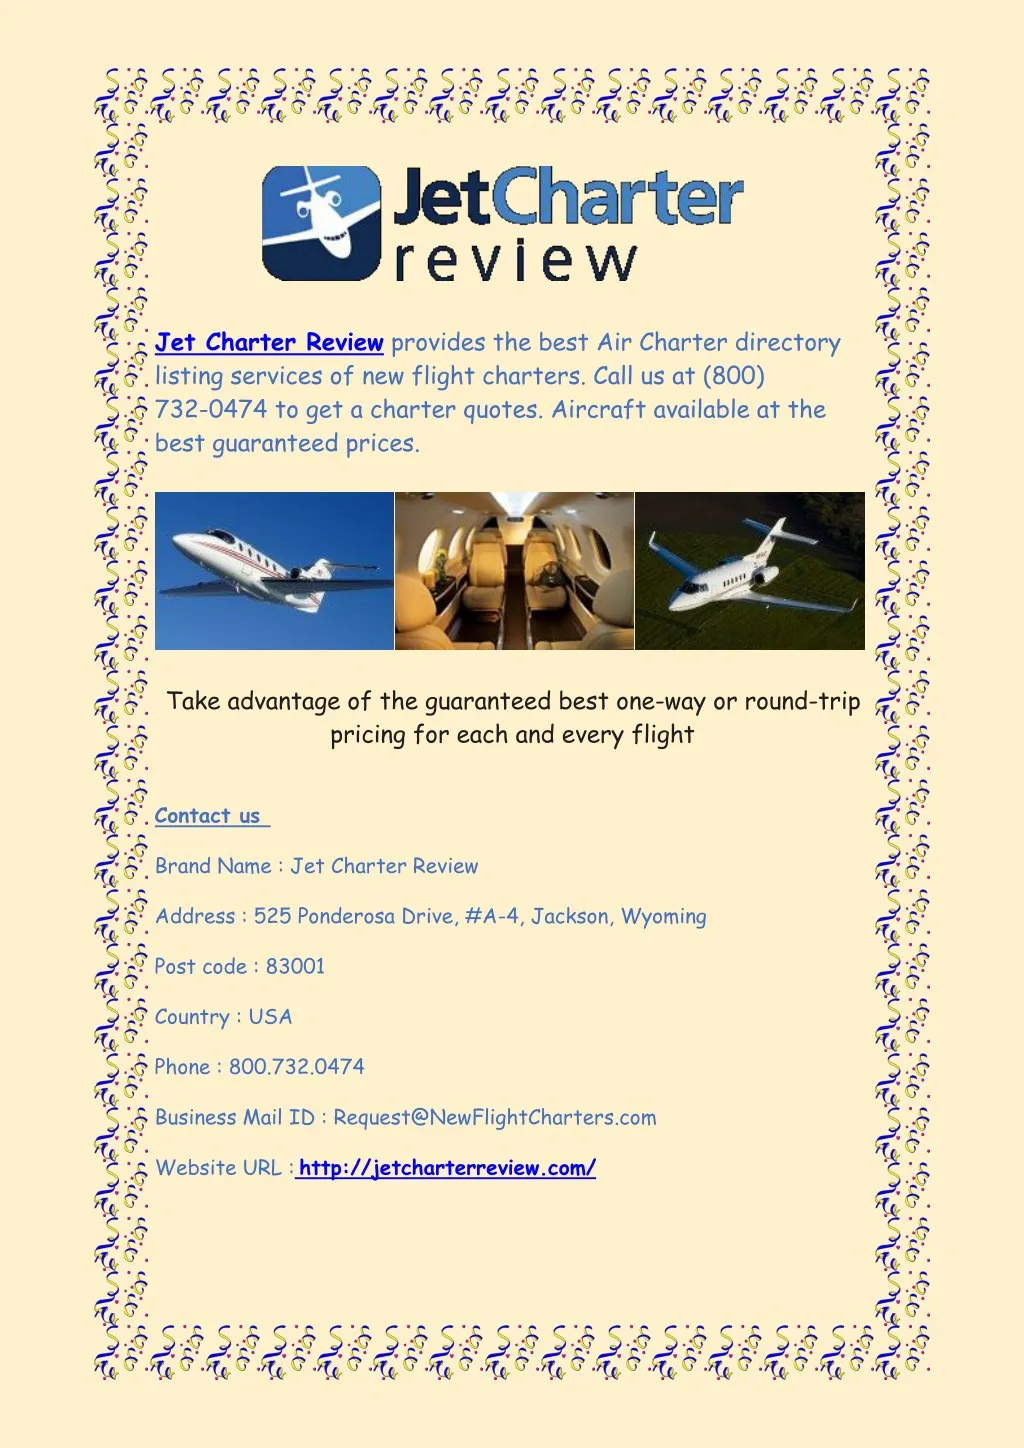 jet charter review provides the best air charter